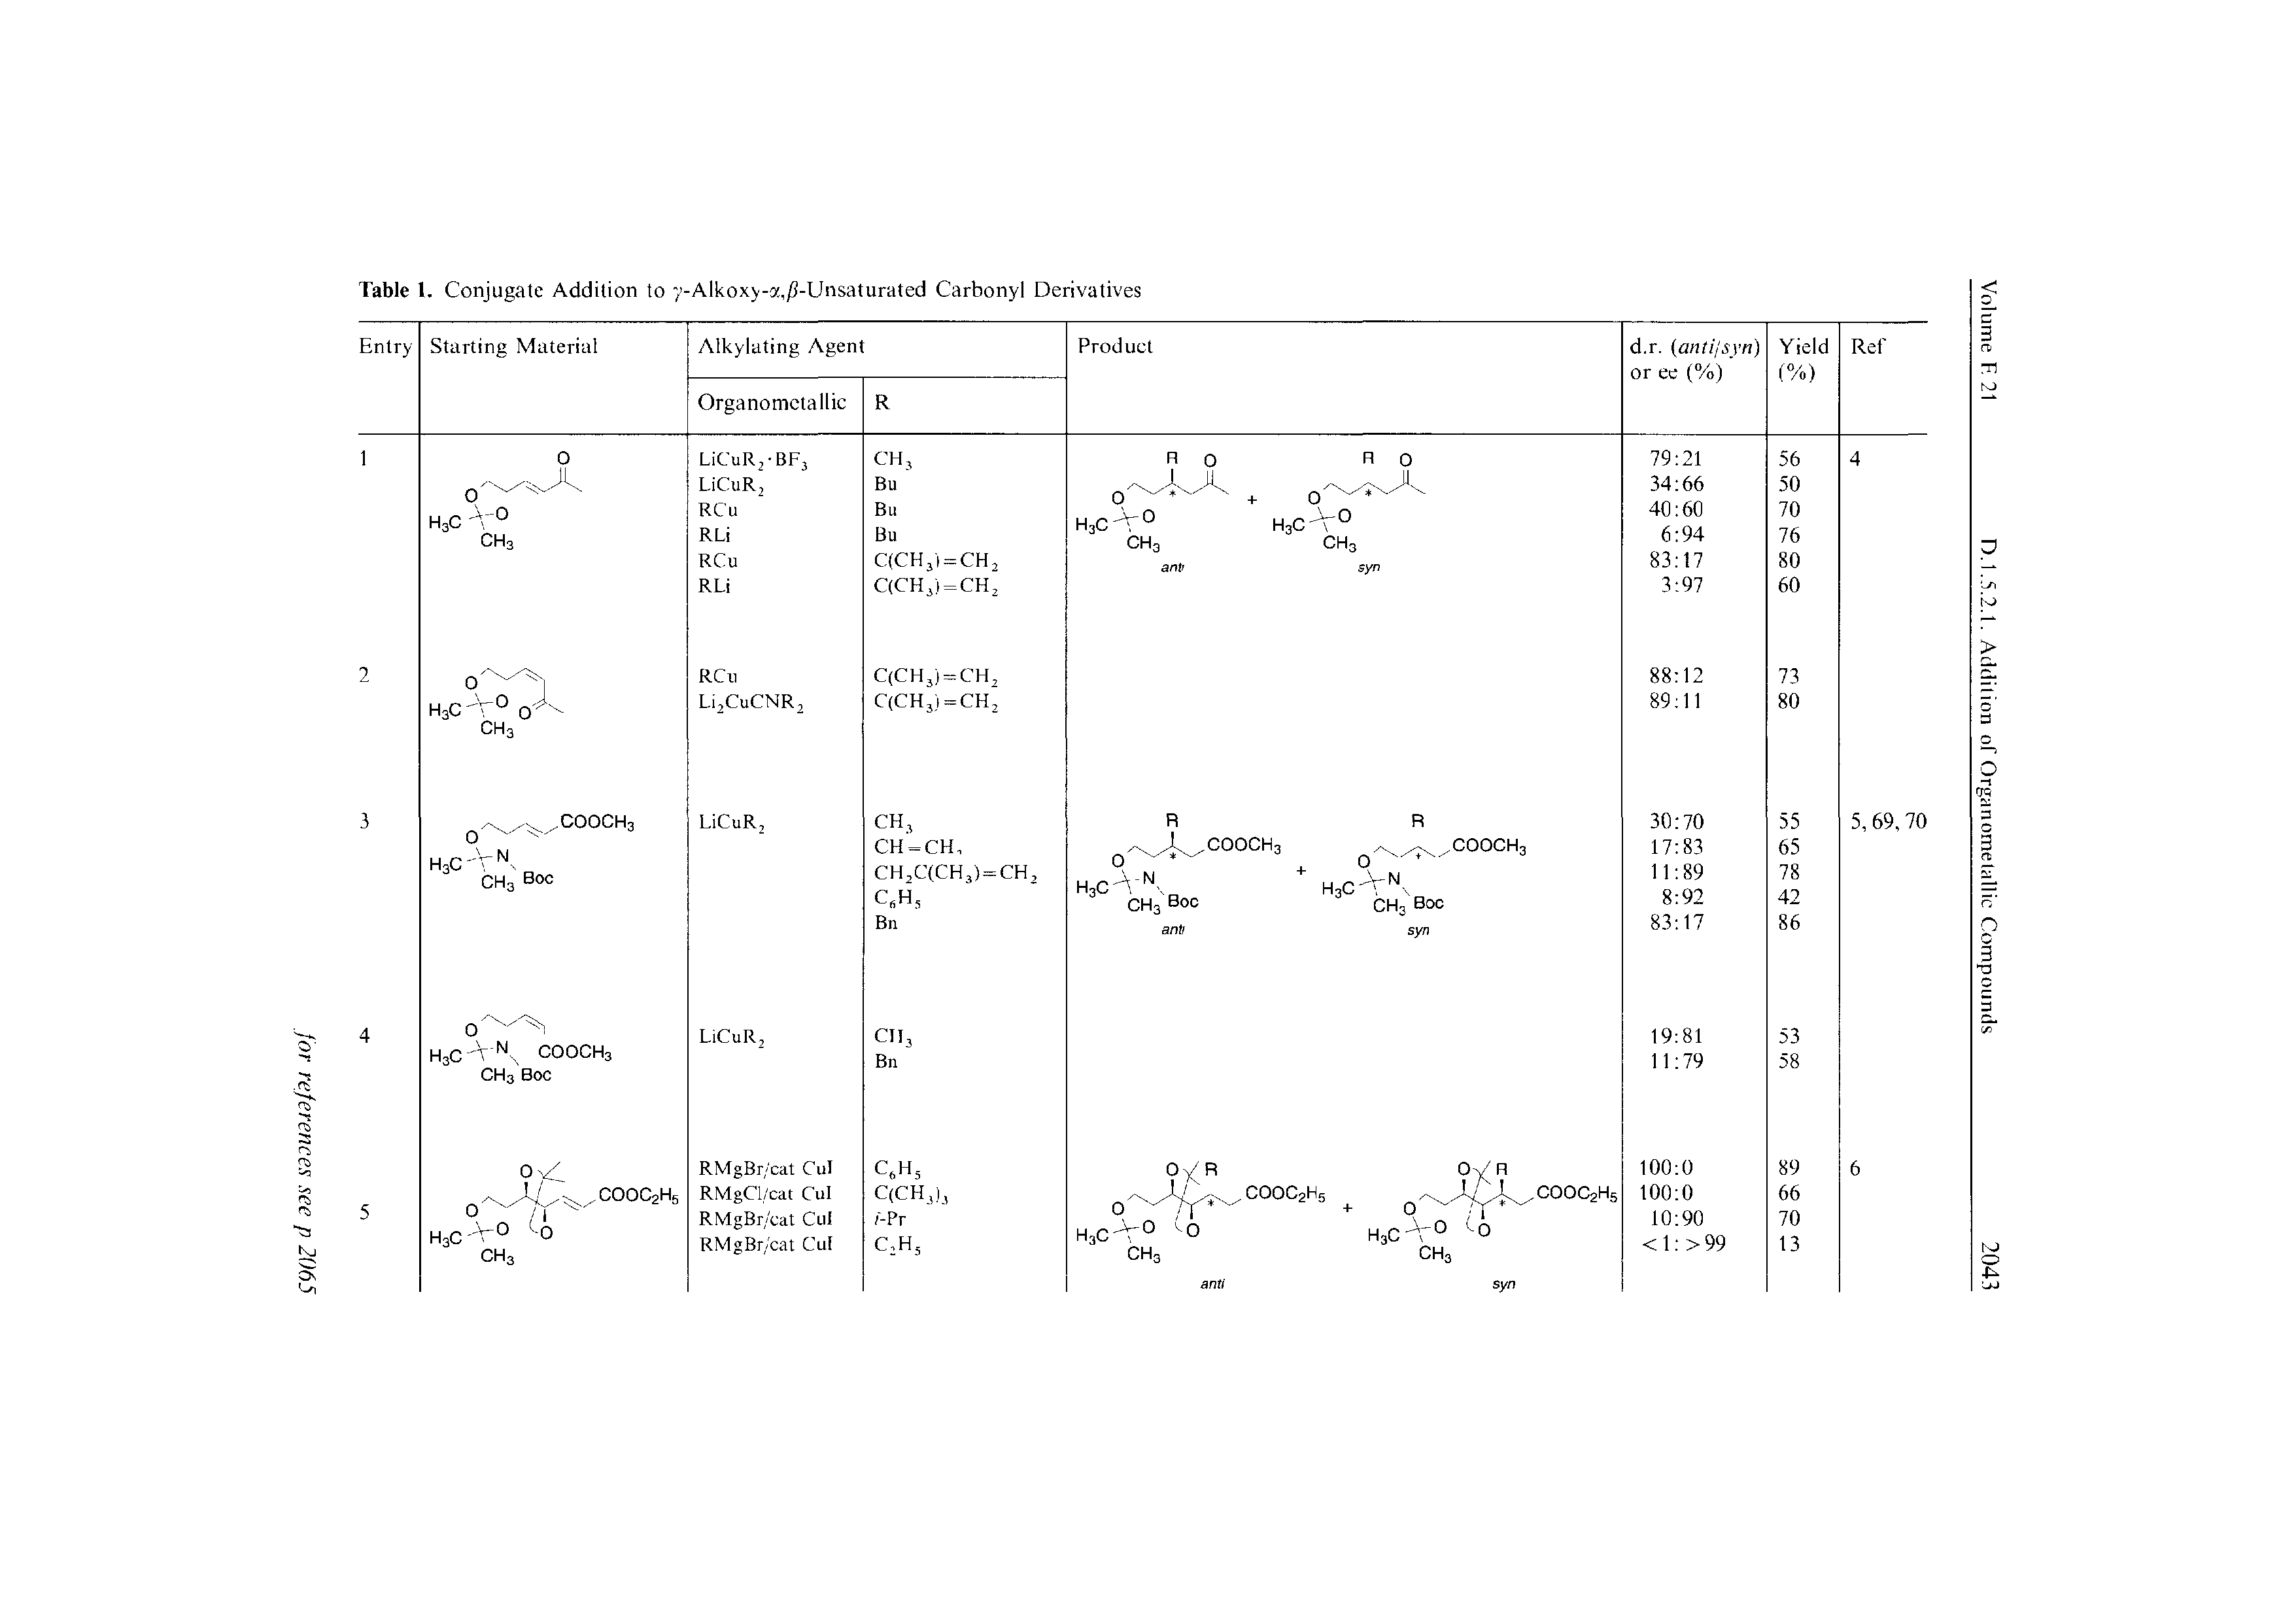 Table 1. Conjugate Addition to >-Alkoxy- x,/J-Unsaturated Carbonyl Derivatives...